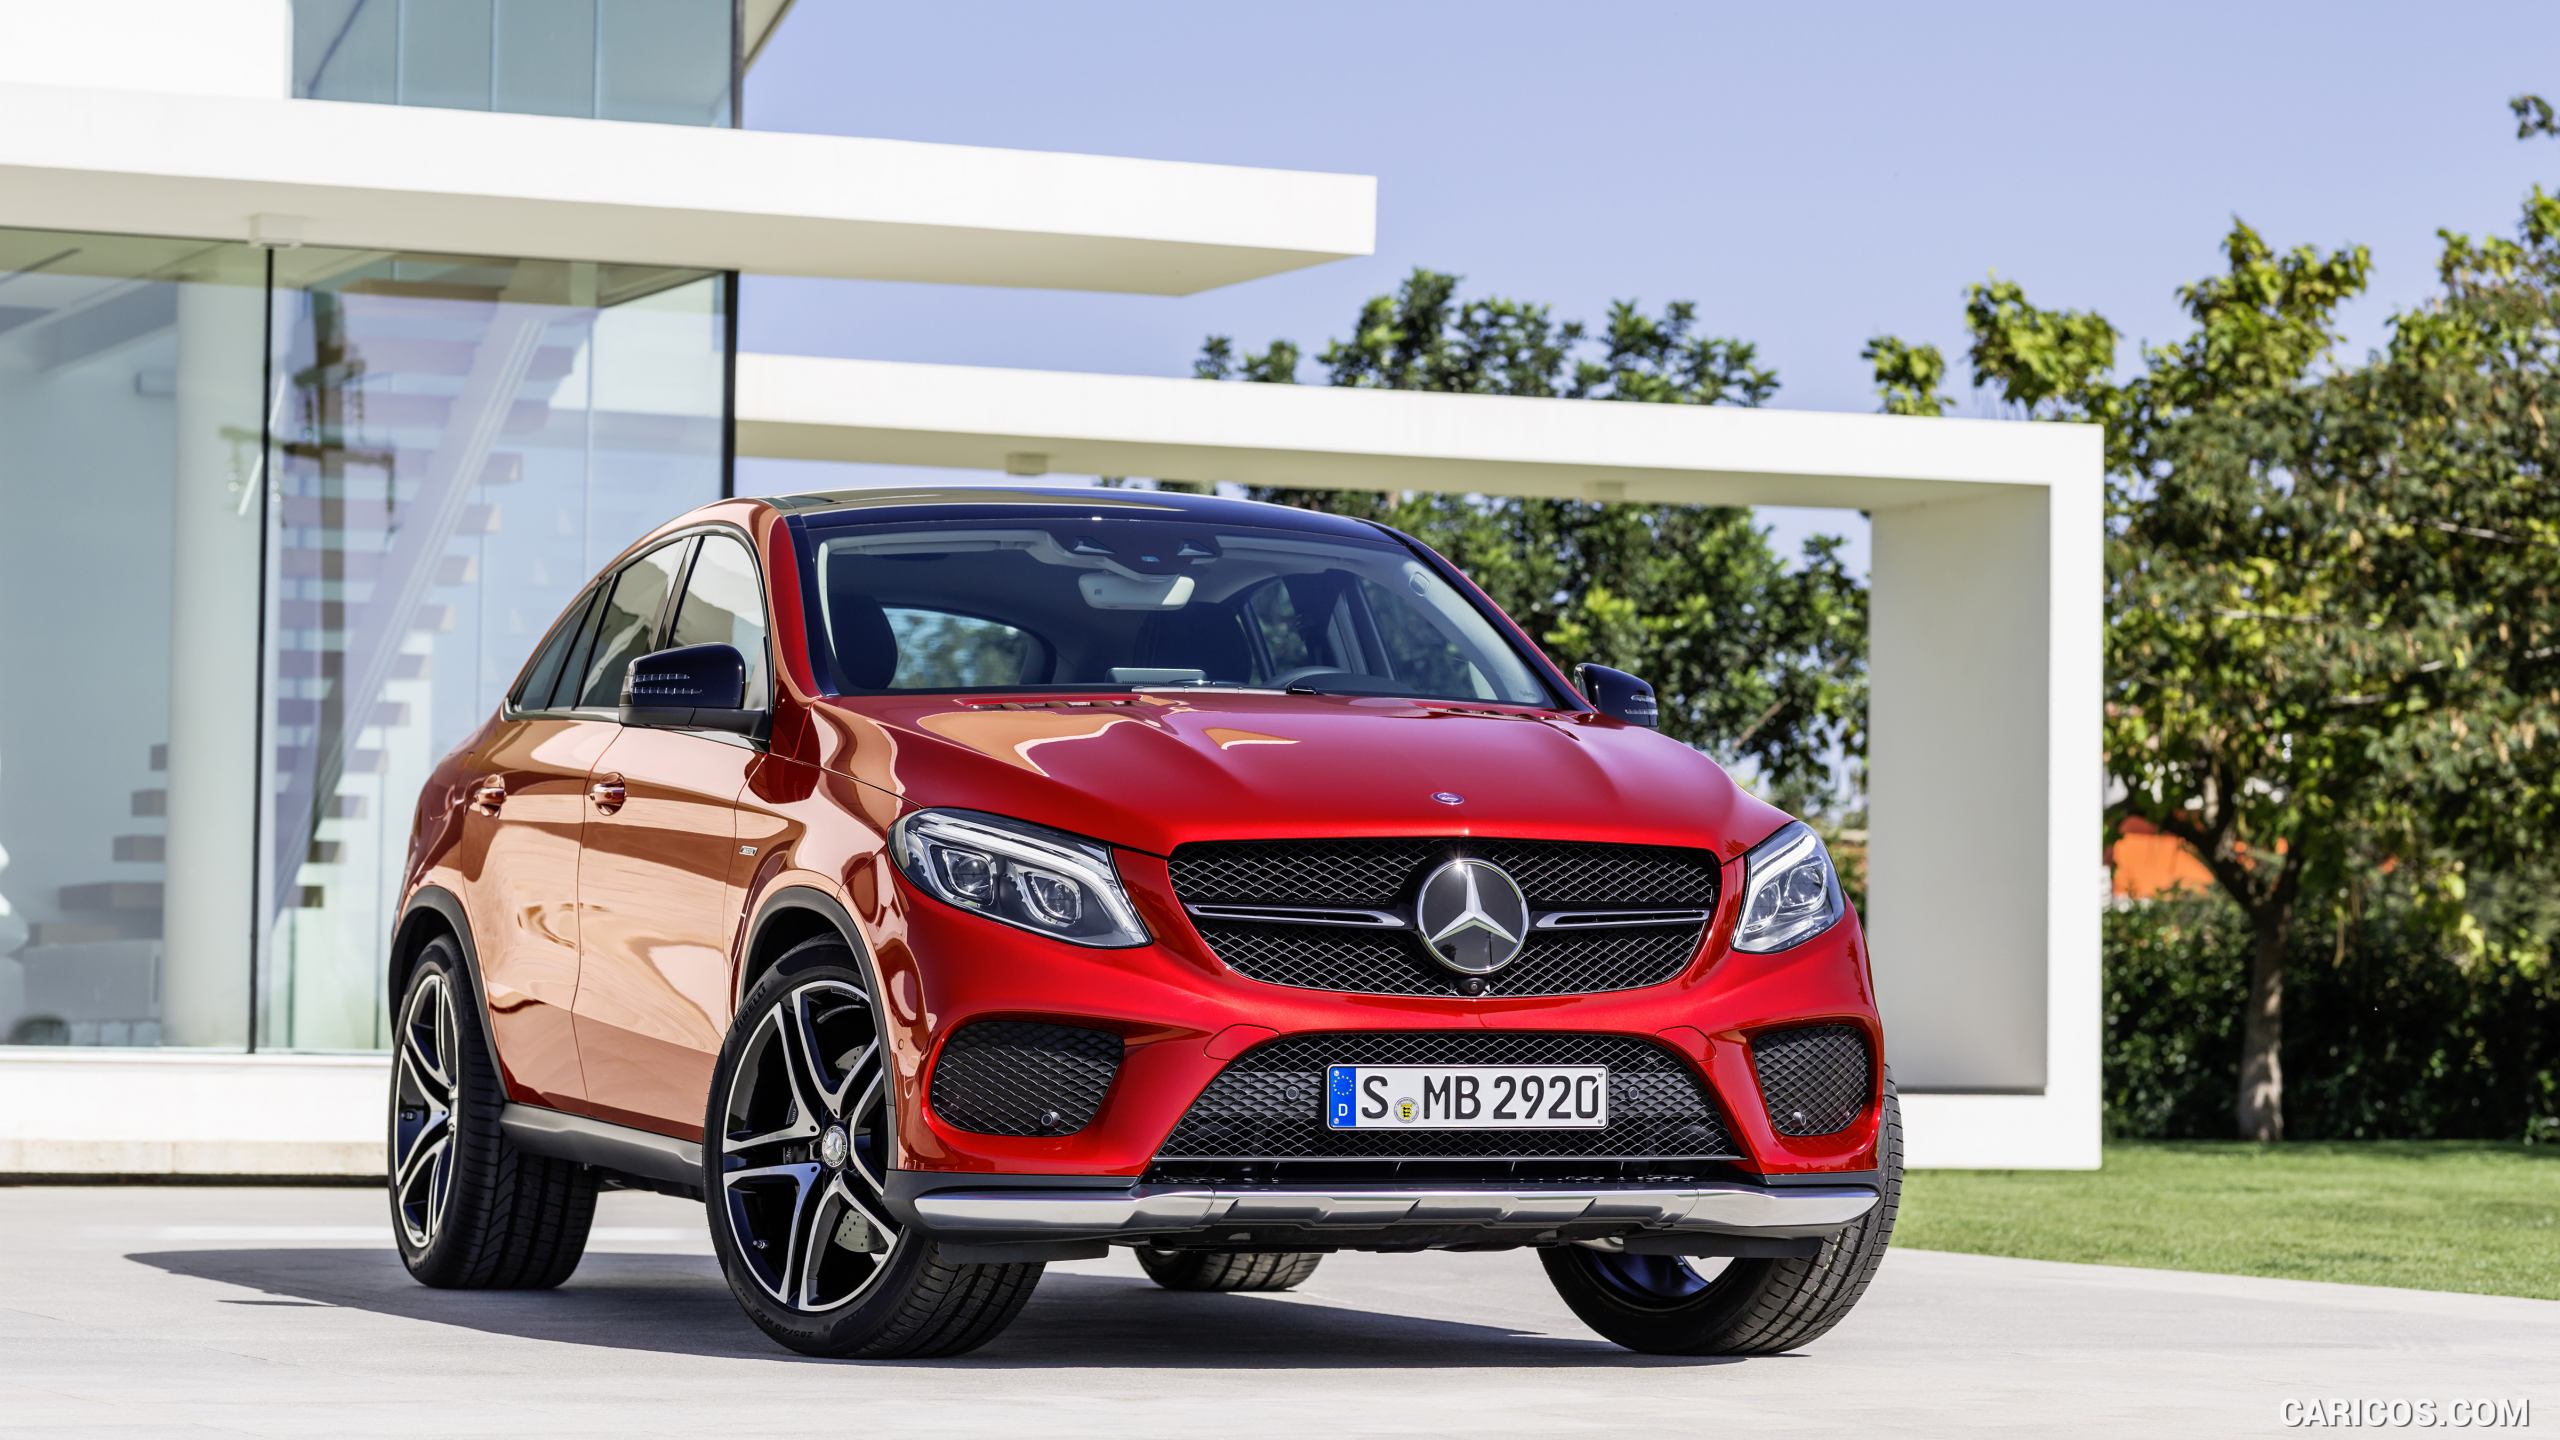 2016 Mercedes-Benz GLE 450 AMG Coupe 4MATIC (Designo Hyacinth Red Metallic) - Front, #1 of 115